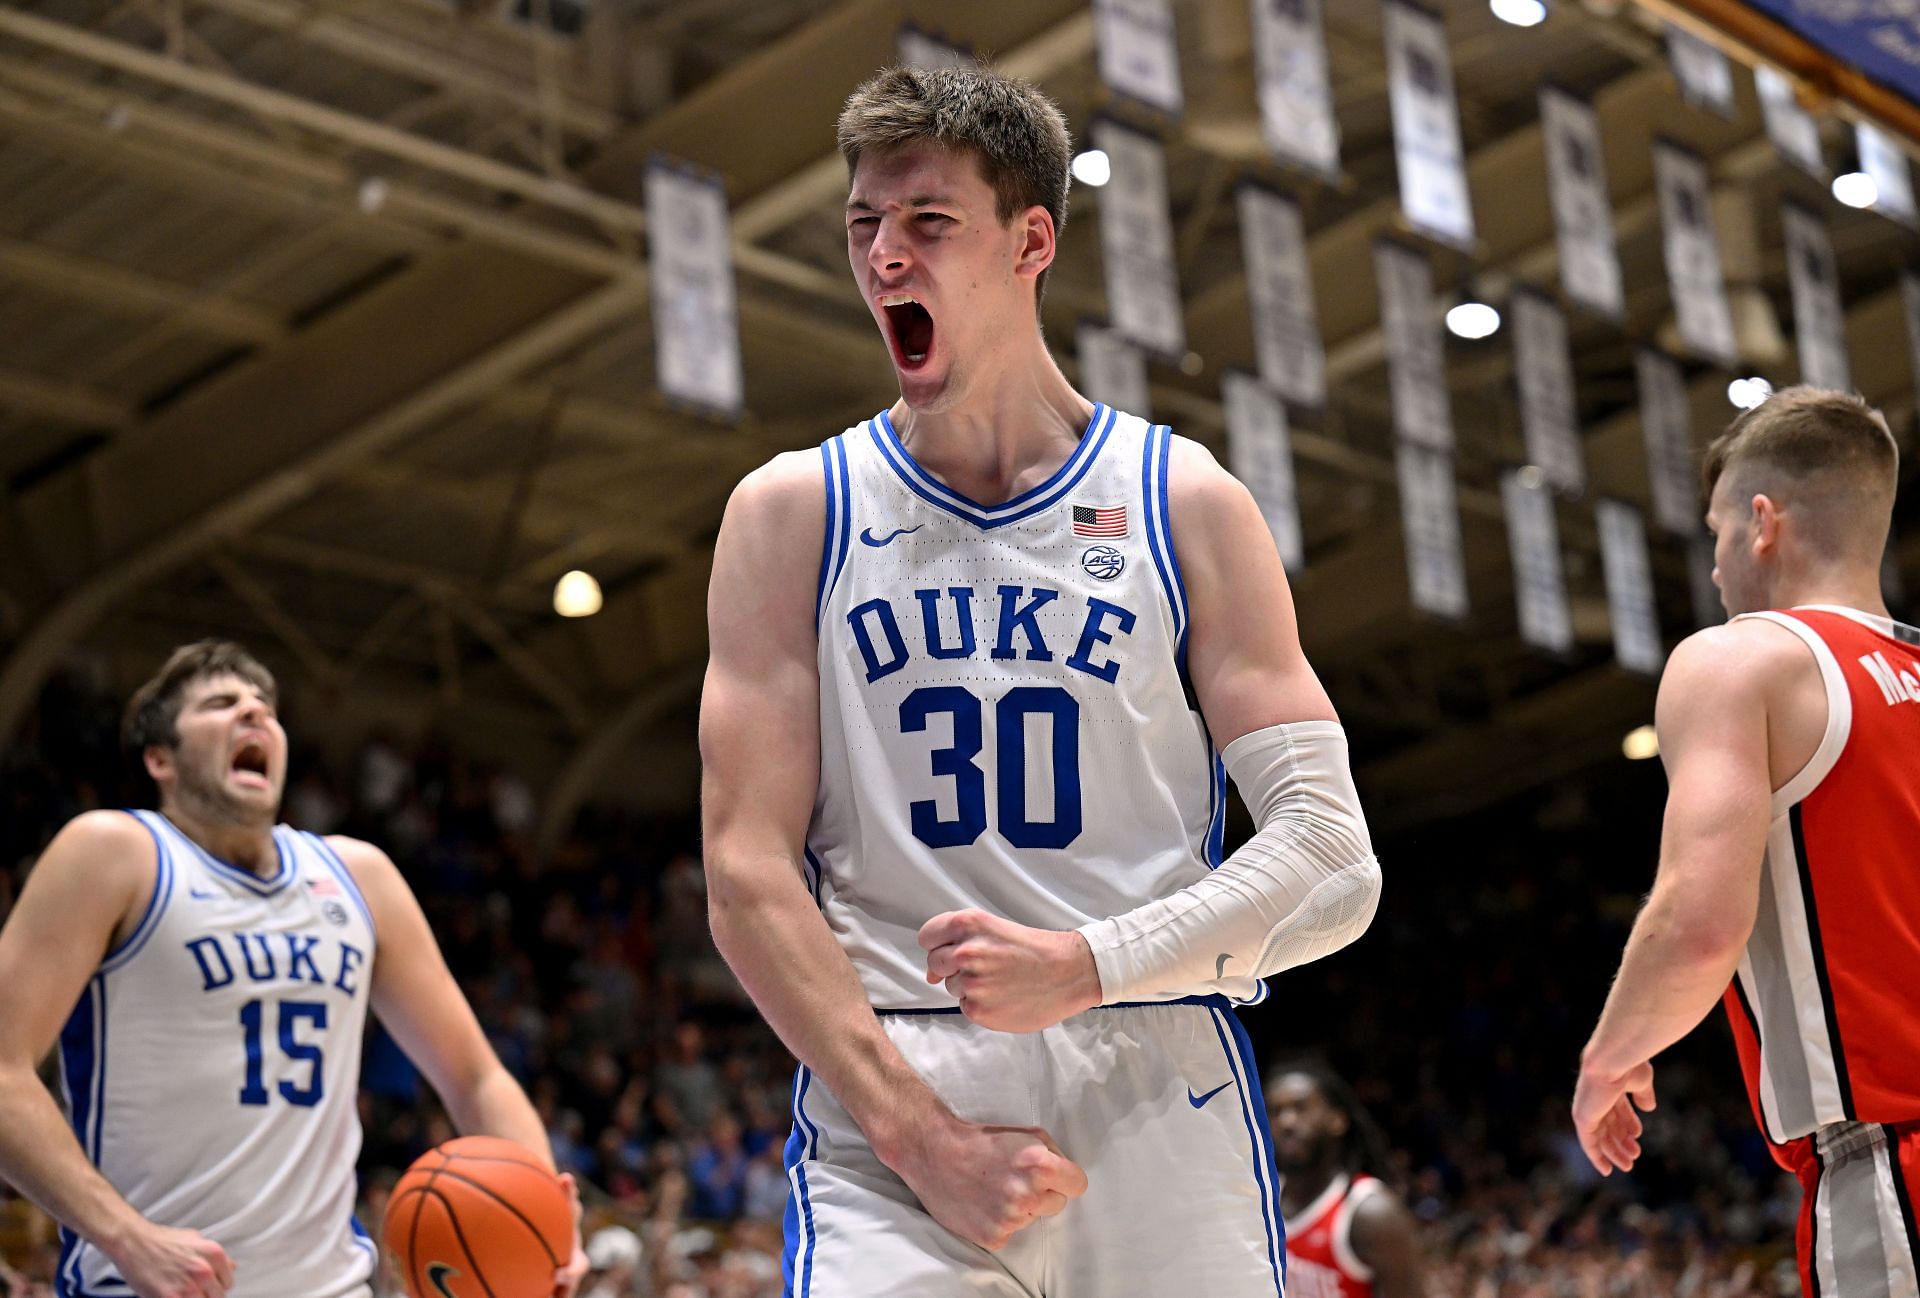 Kyle Filipowski is dazzled playing for Duke Blue Devils “The hype and